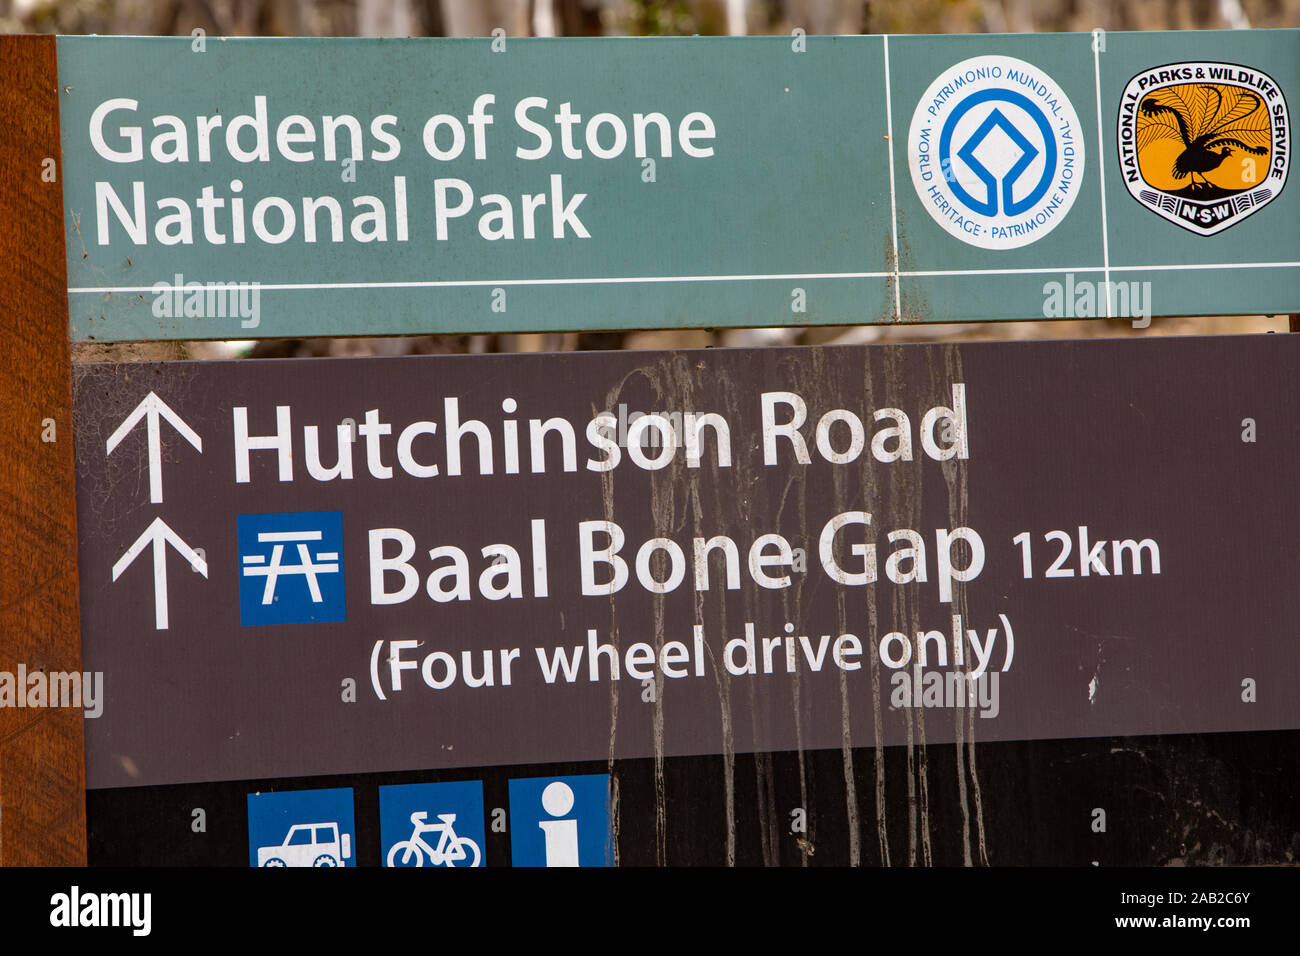 Gardens of stone national park in New South Wales and the baal bone gap off road track,NSW,Australia Stock Photo